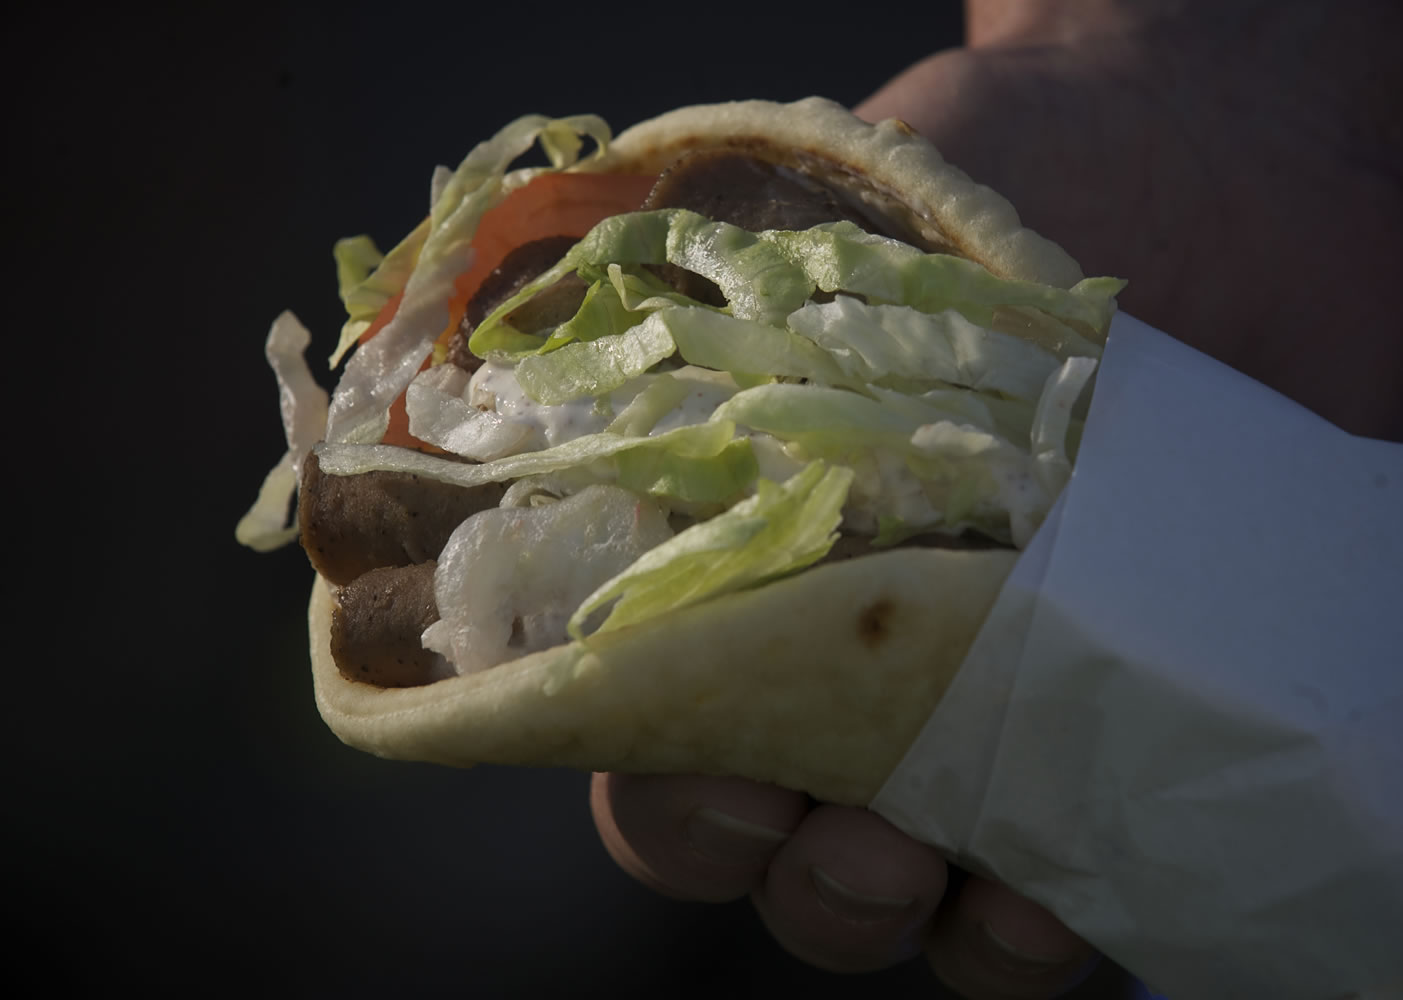 The beef and lamb gyro is among the offerings at Getta Gyro in Vancouver.